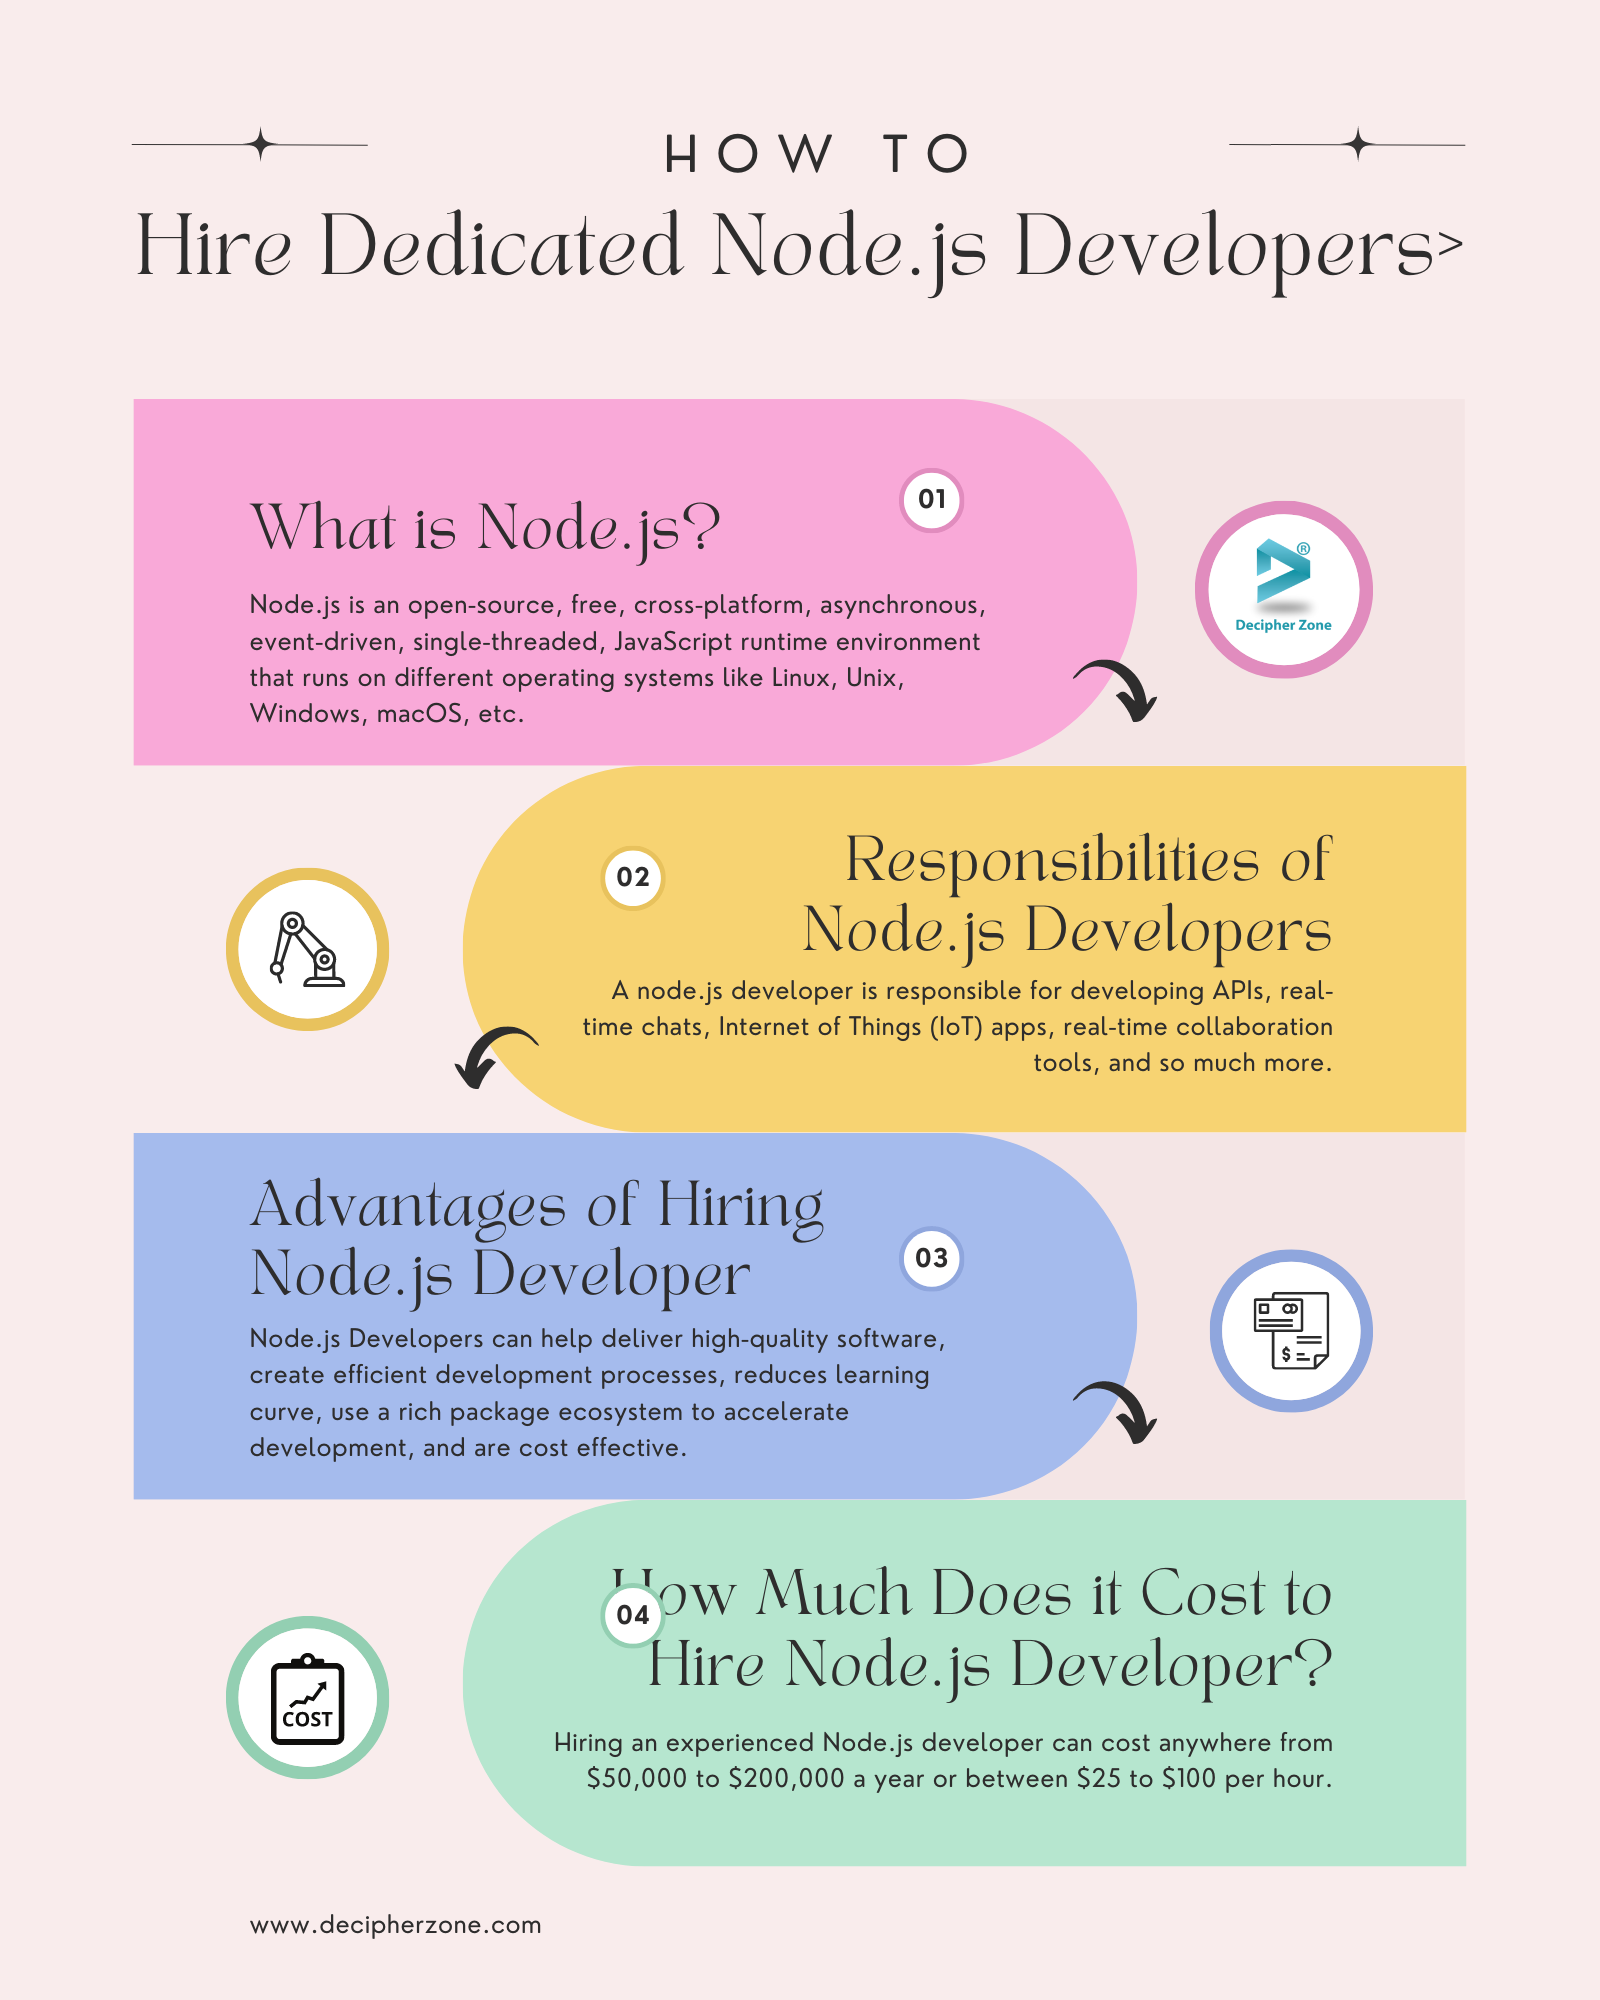 How To Hire Dedicated Node.js Developers?